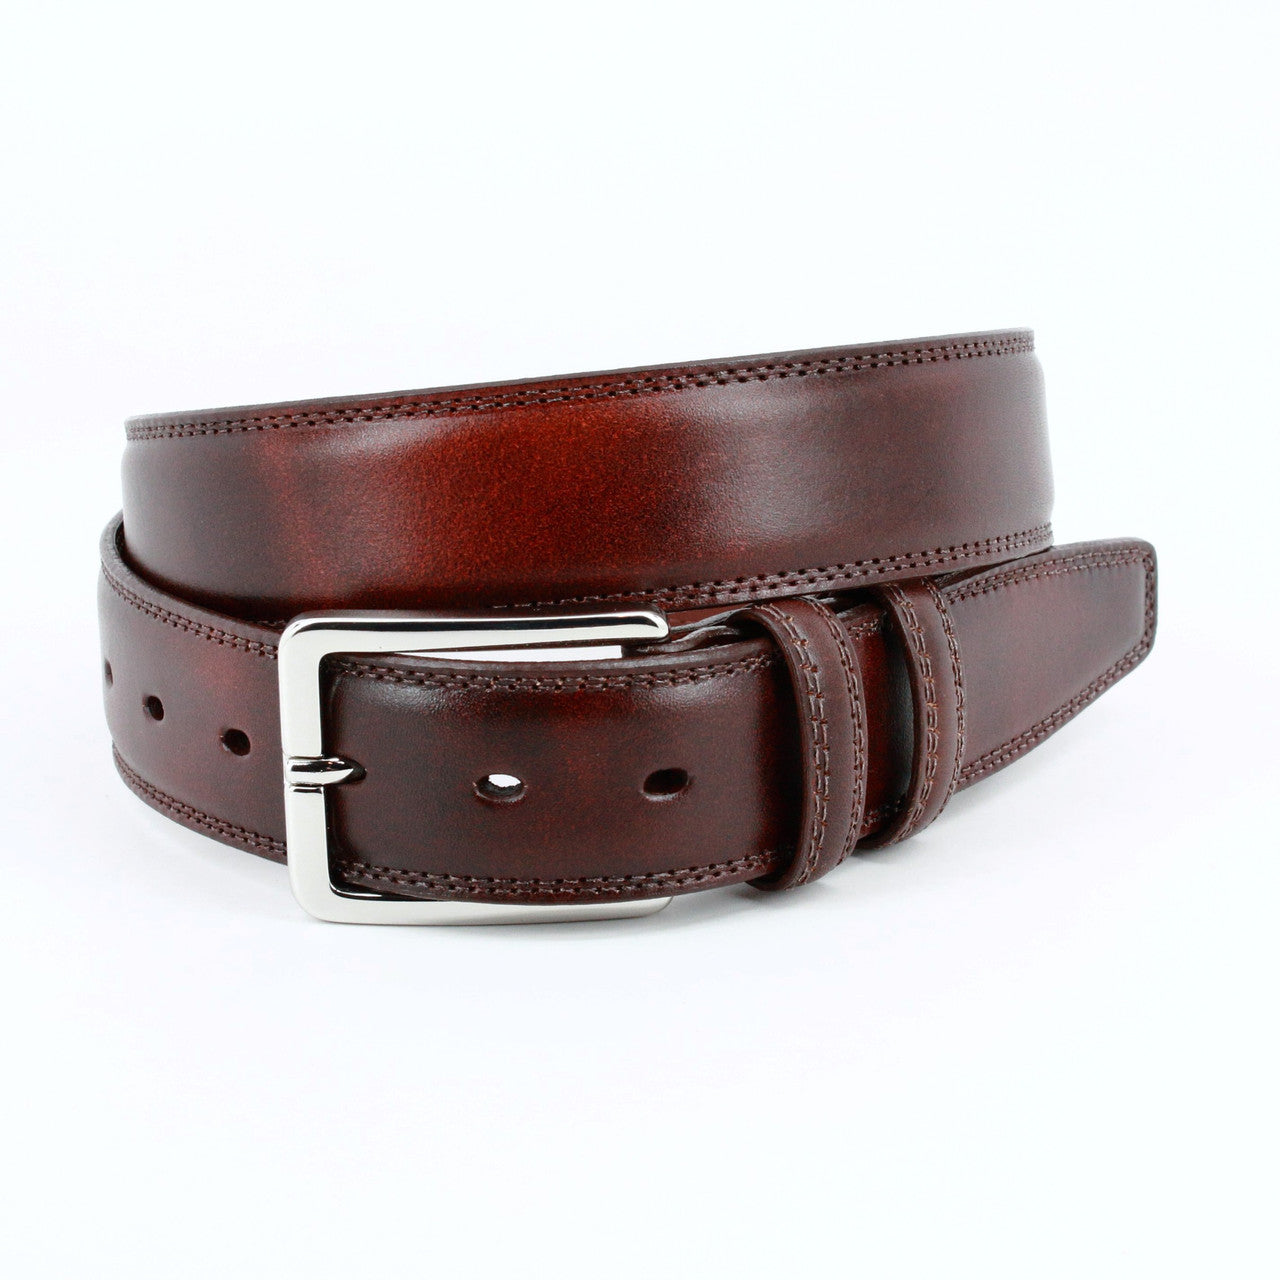 Hand Antiqued Italian Calfskin Leather Belt in Mahogany by Torino Leather